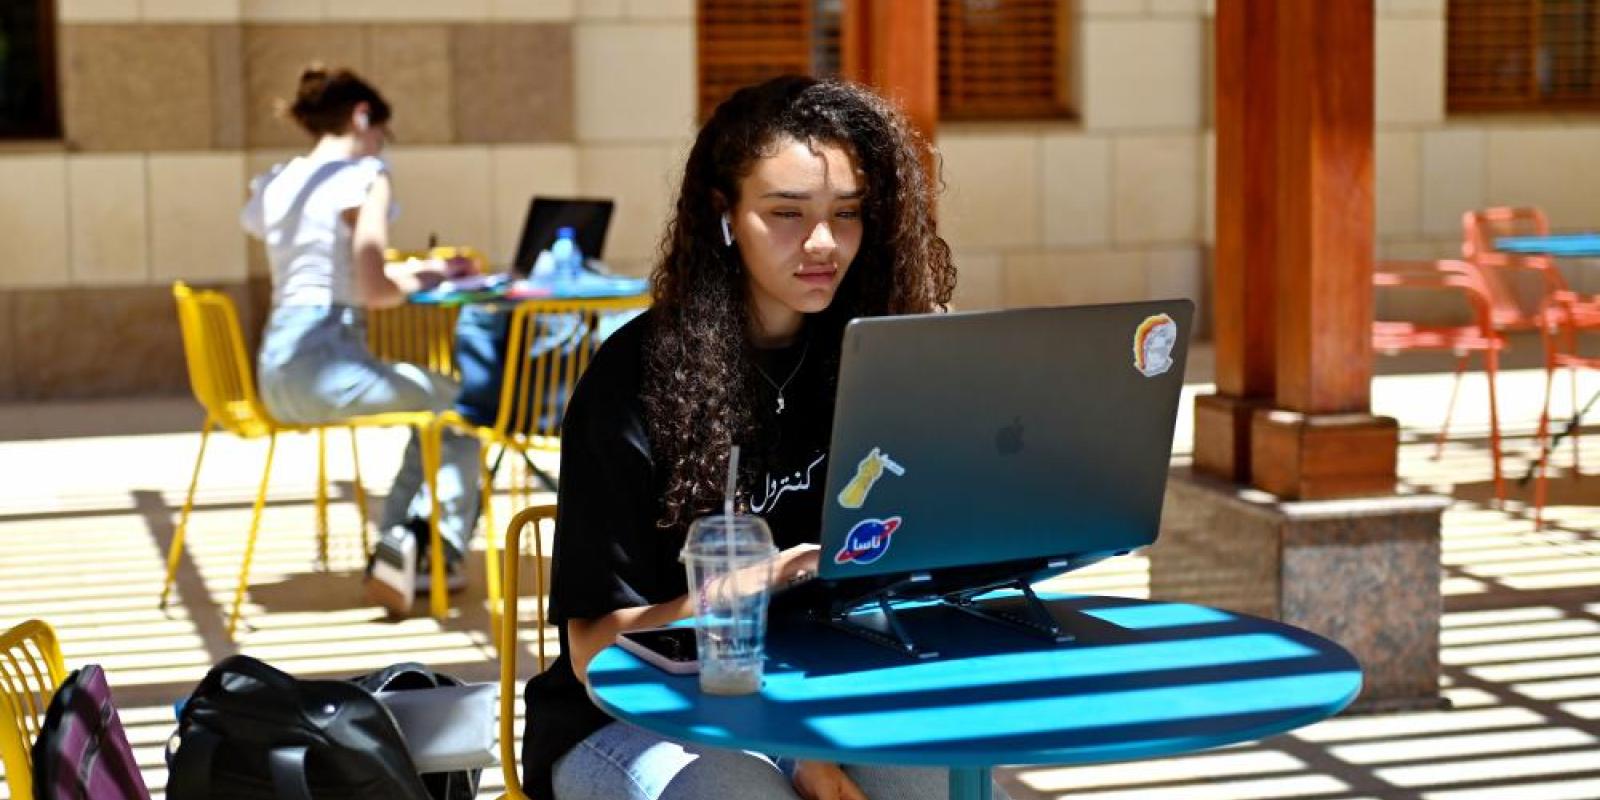 Girl sitting on her laptop outdoors